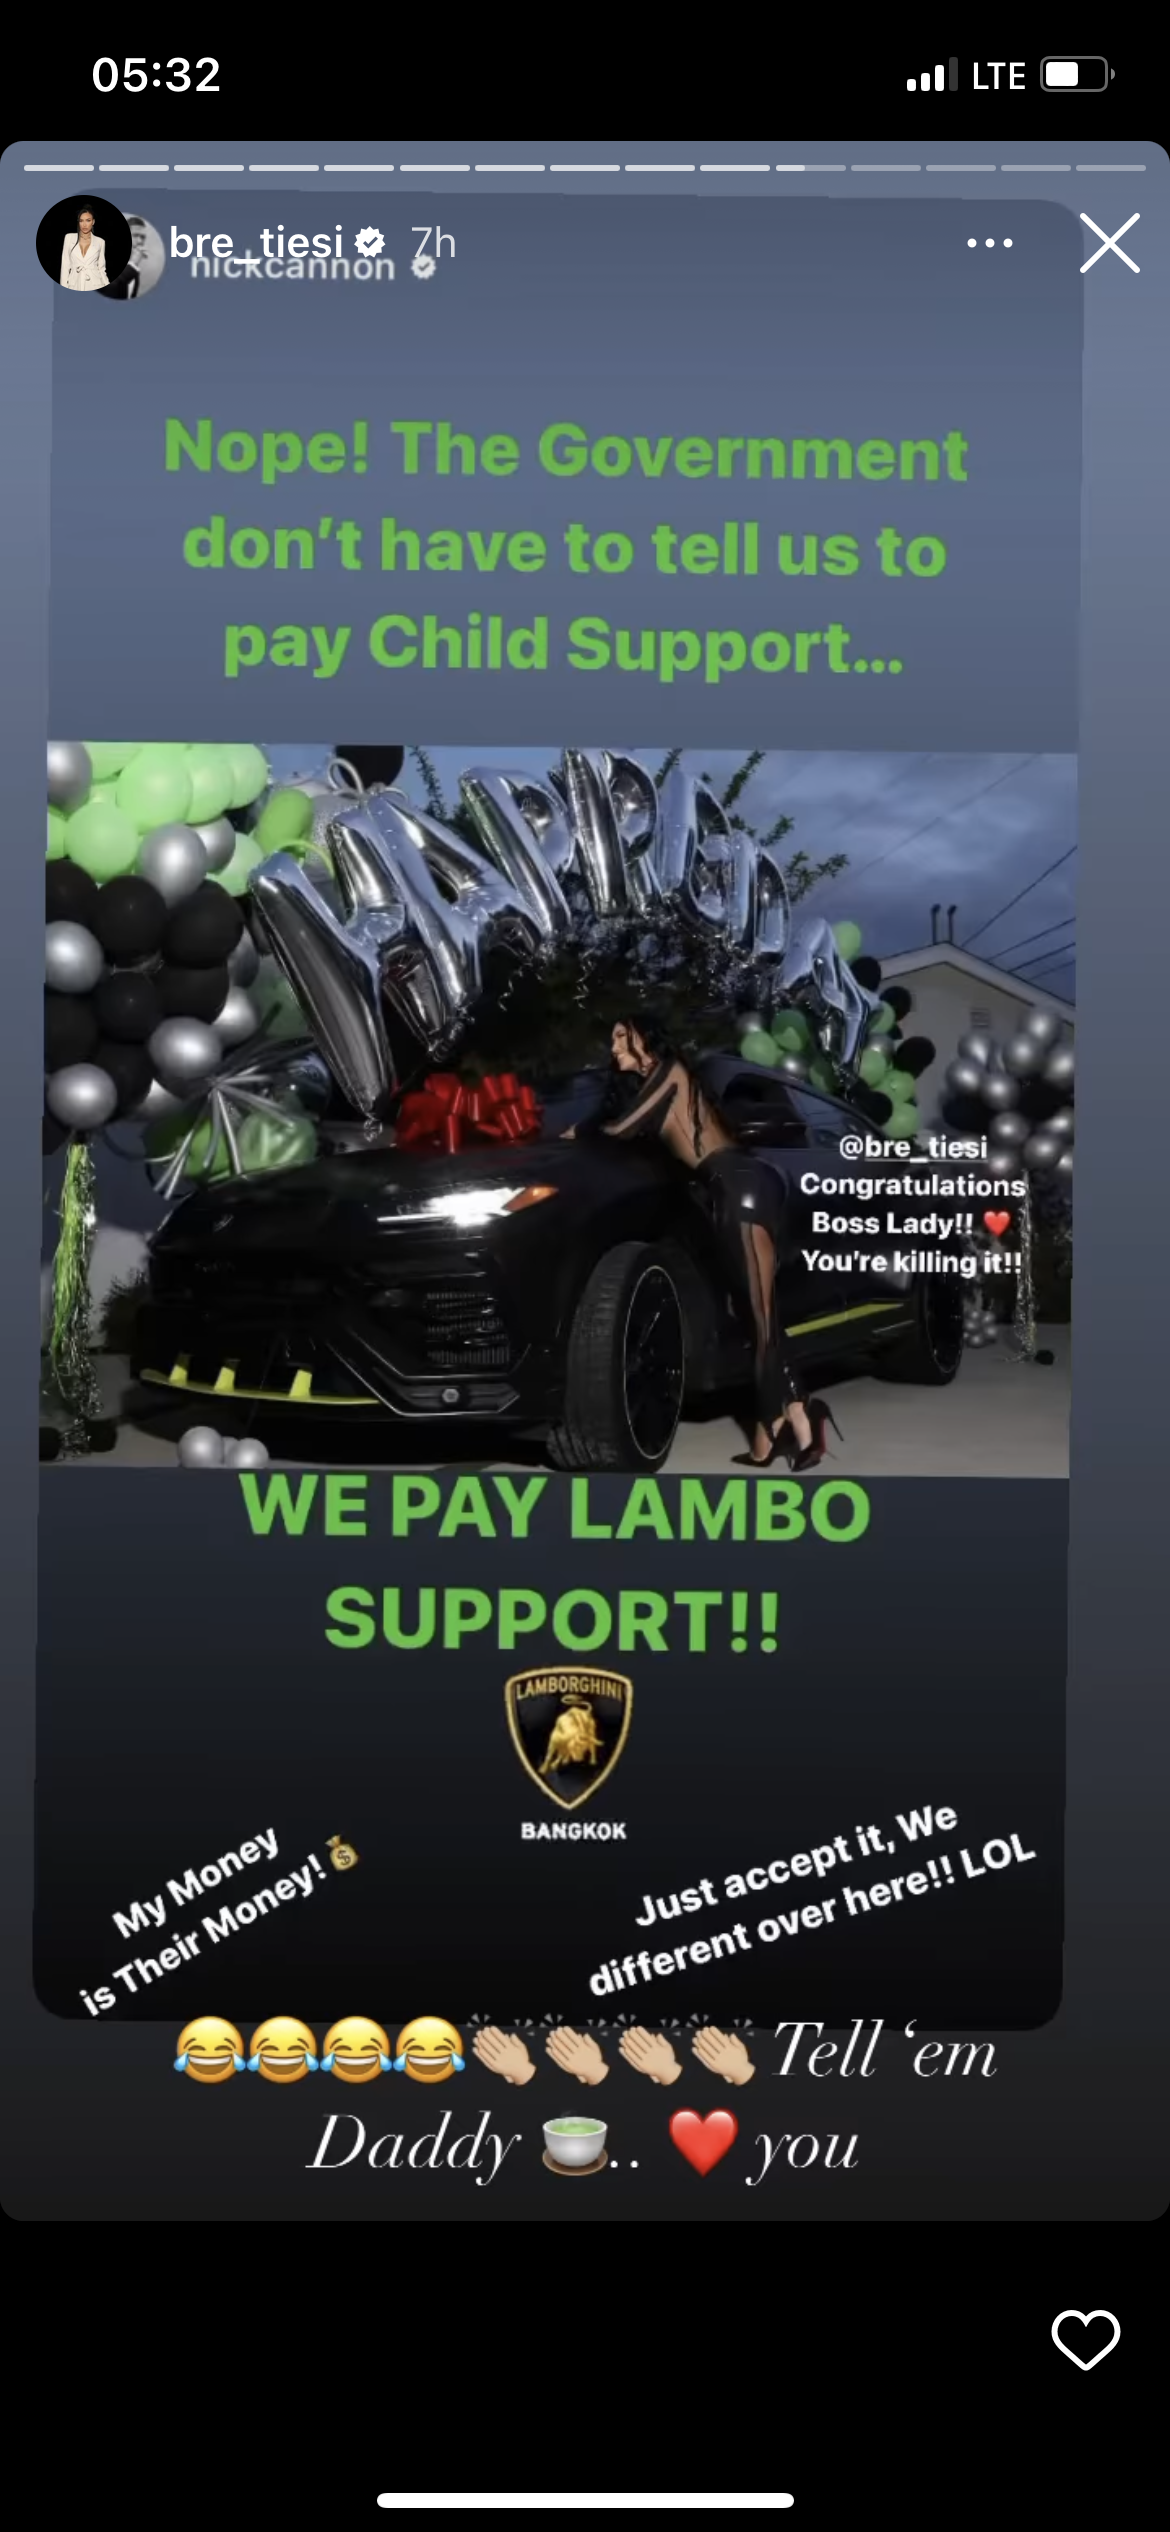 Nick Cannon says he pays Lambo support